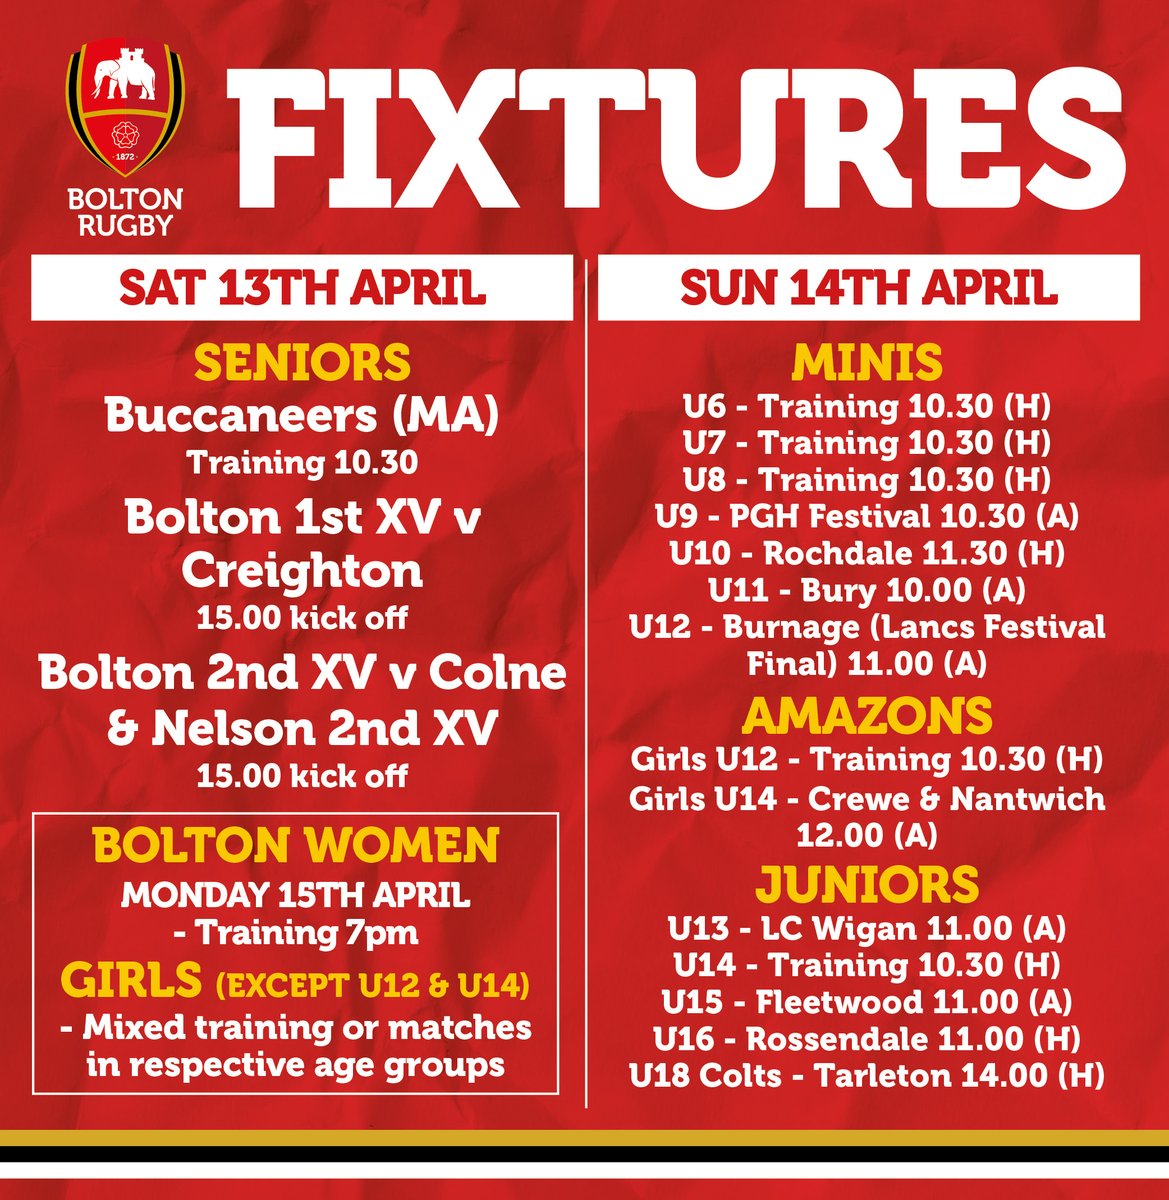 All your Club fixtures for the weekend are here.
We have two home fixtures for our senior teams on Saturday and our mixed ability team @BuccaneersMA are training in the morning at 10.30am.
Good luck everyone!

#boltonrugbyclub #boltonrufc #womensrugby #girlsrugby #MARugby